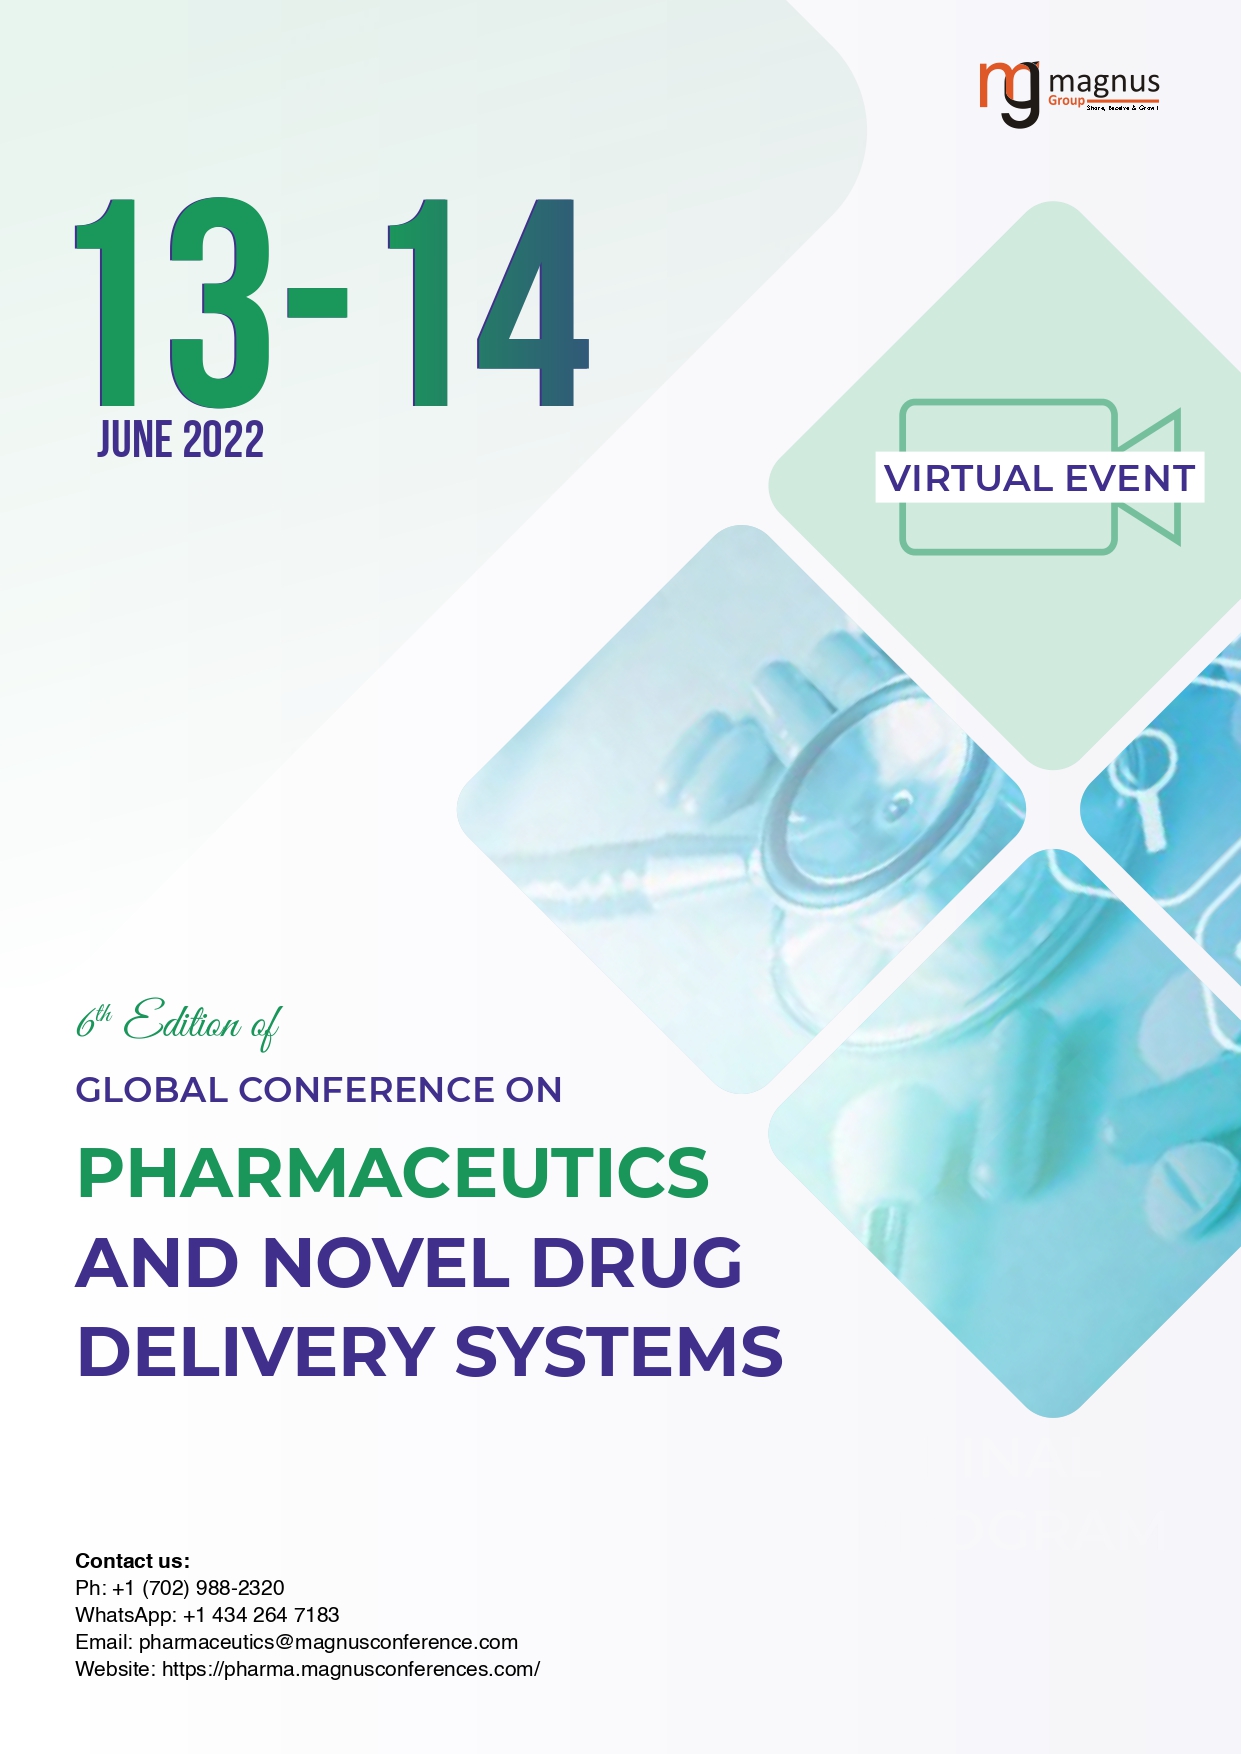 6th Edition of Global Conference on  Pharmaceutics and Novel Drug Delivery Systems | Online Event Program